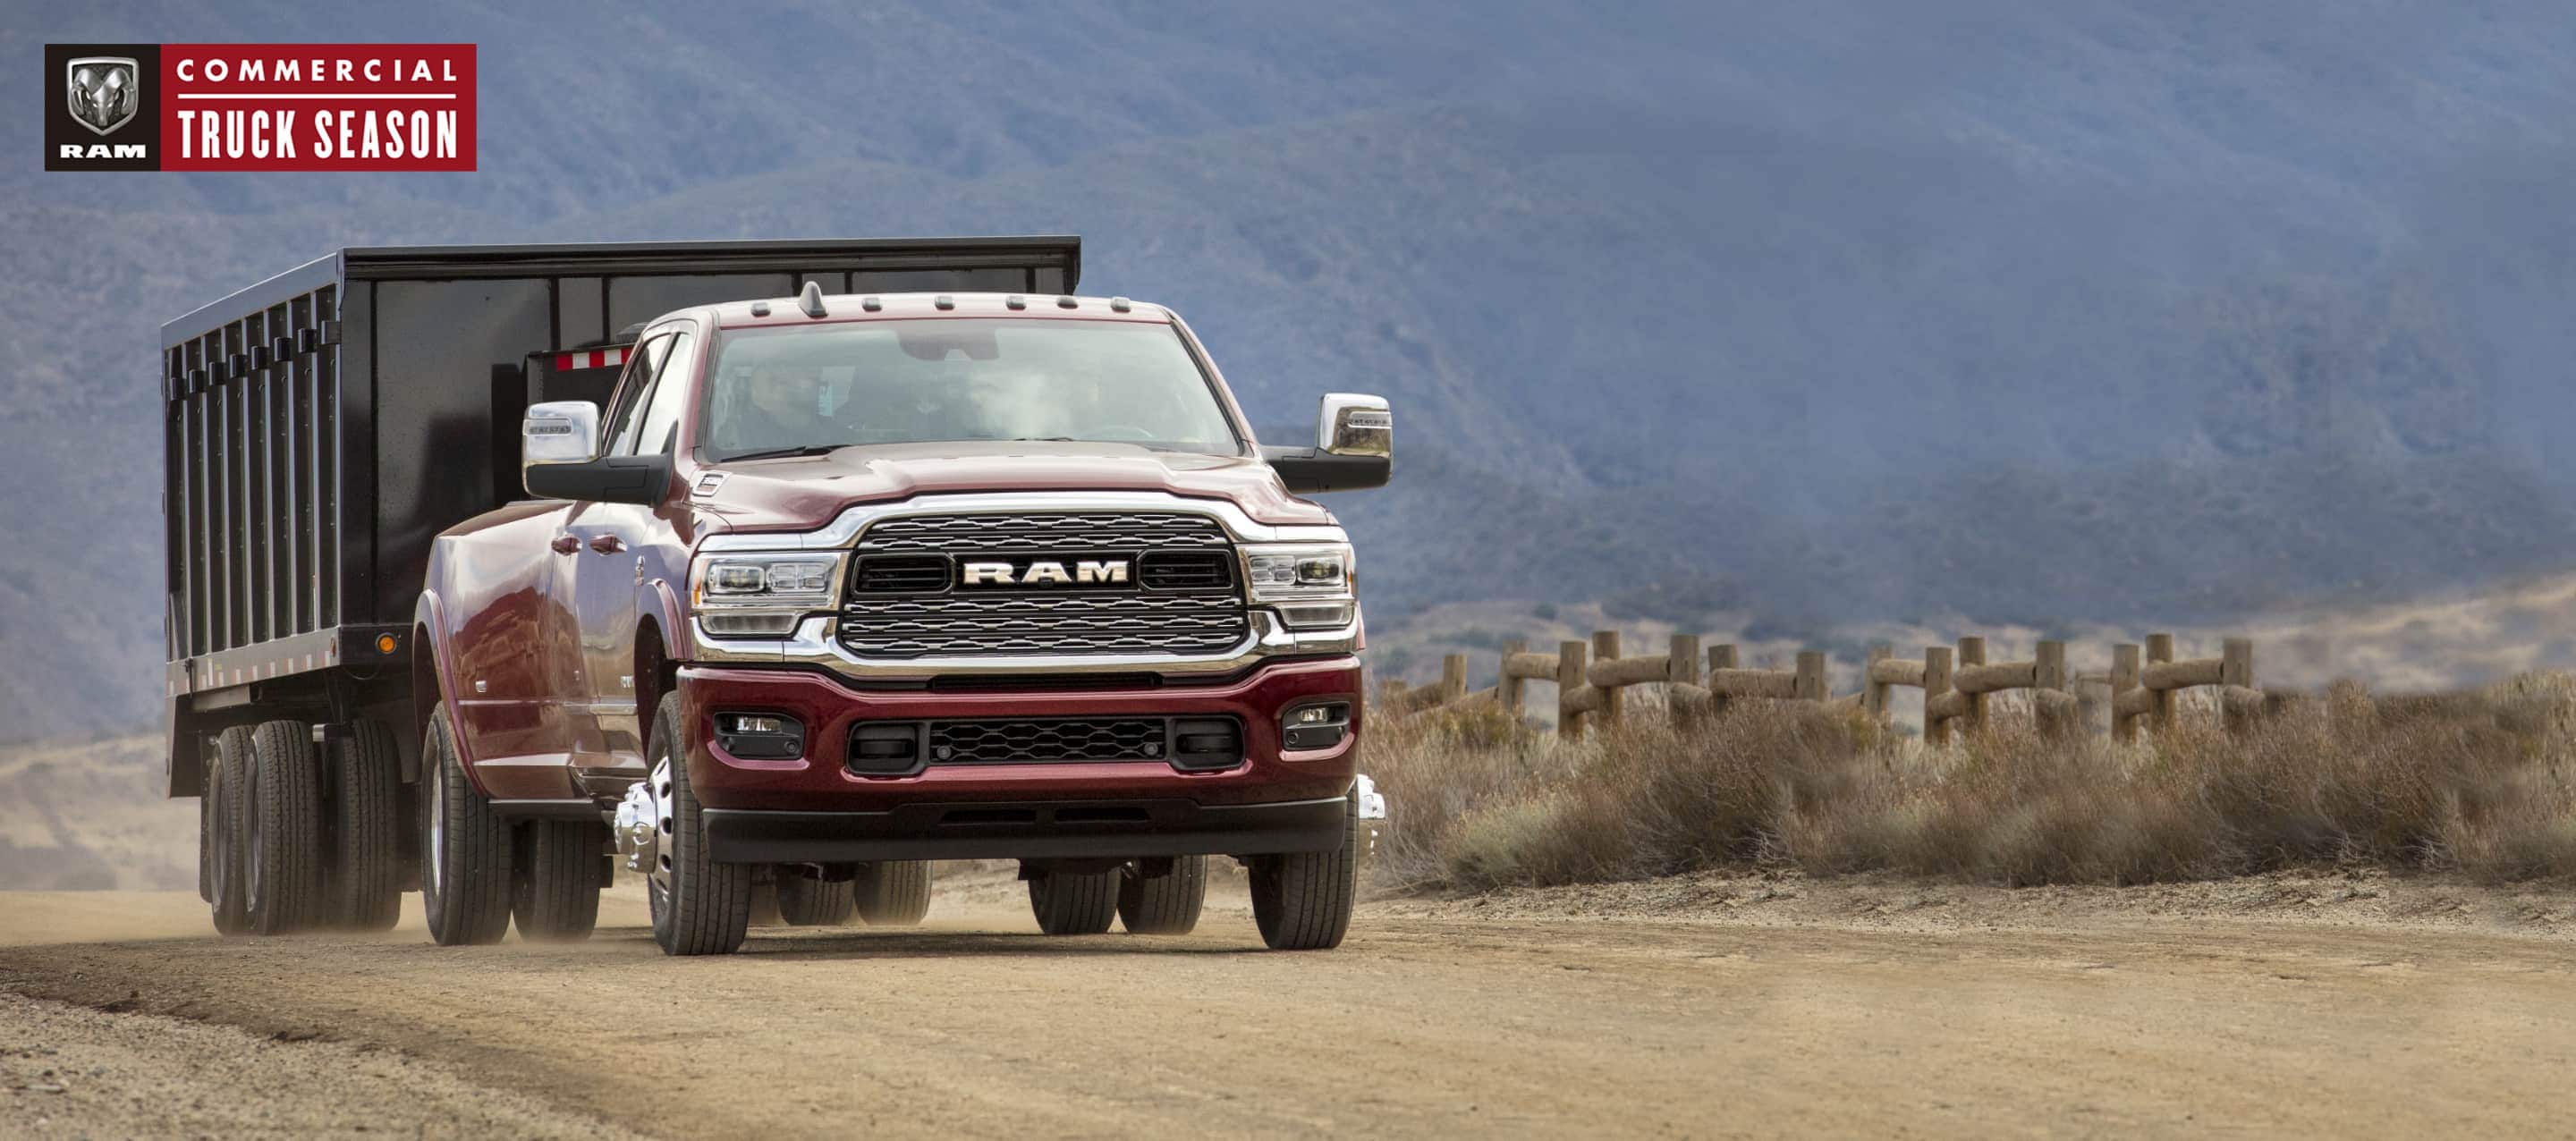 A 2023 Ram 3500 Limited towing a dump body trailer on a dirt road with mountains in the distance.